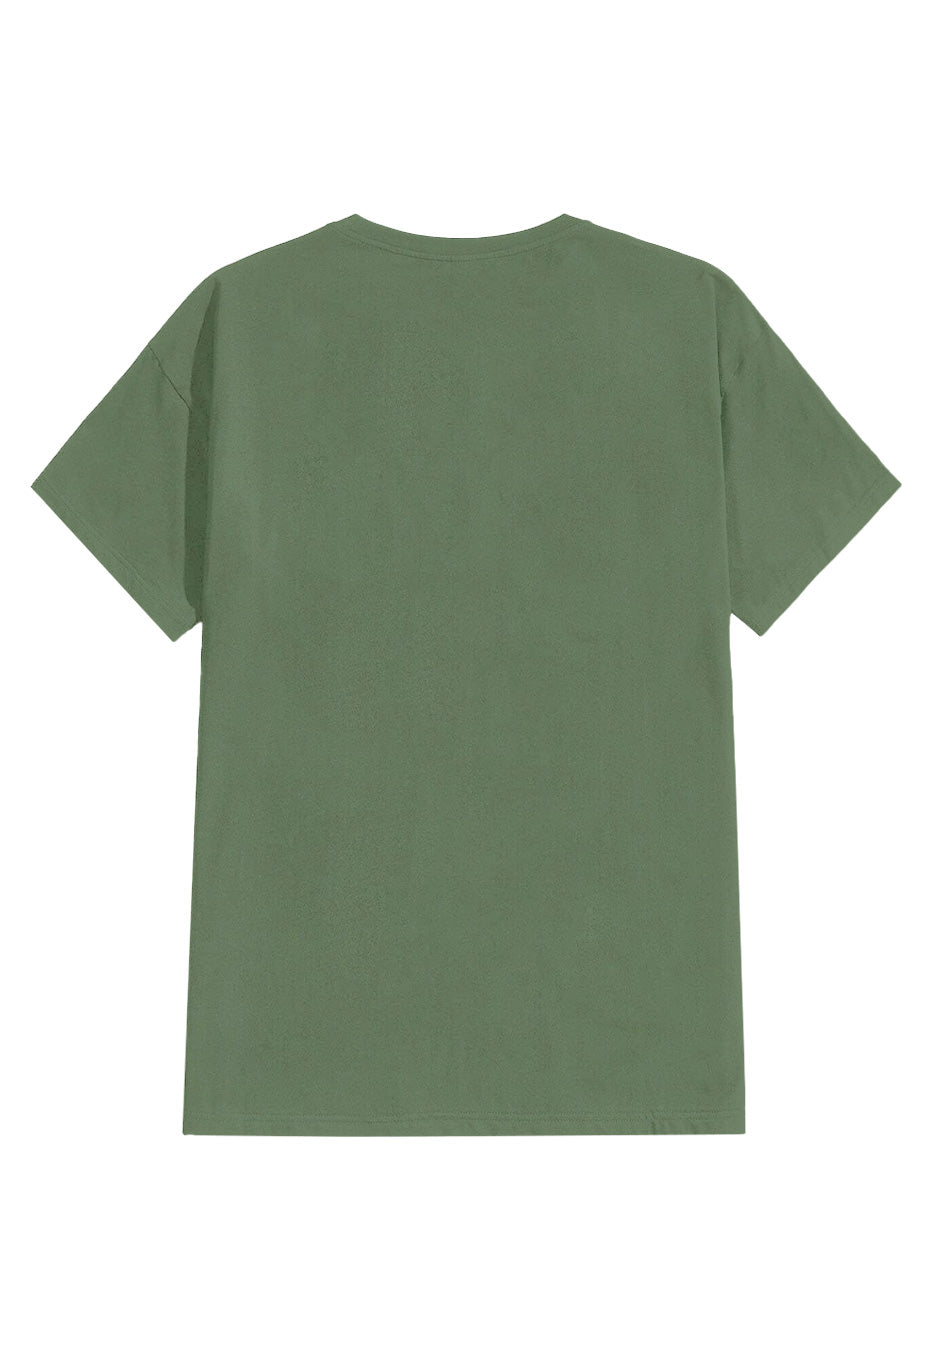 August Burns Red - Death Below Military Green - T-Shirt | Neutral-Image